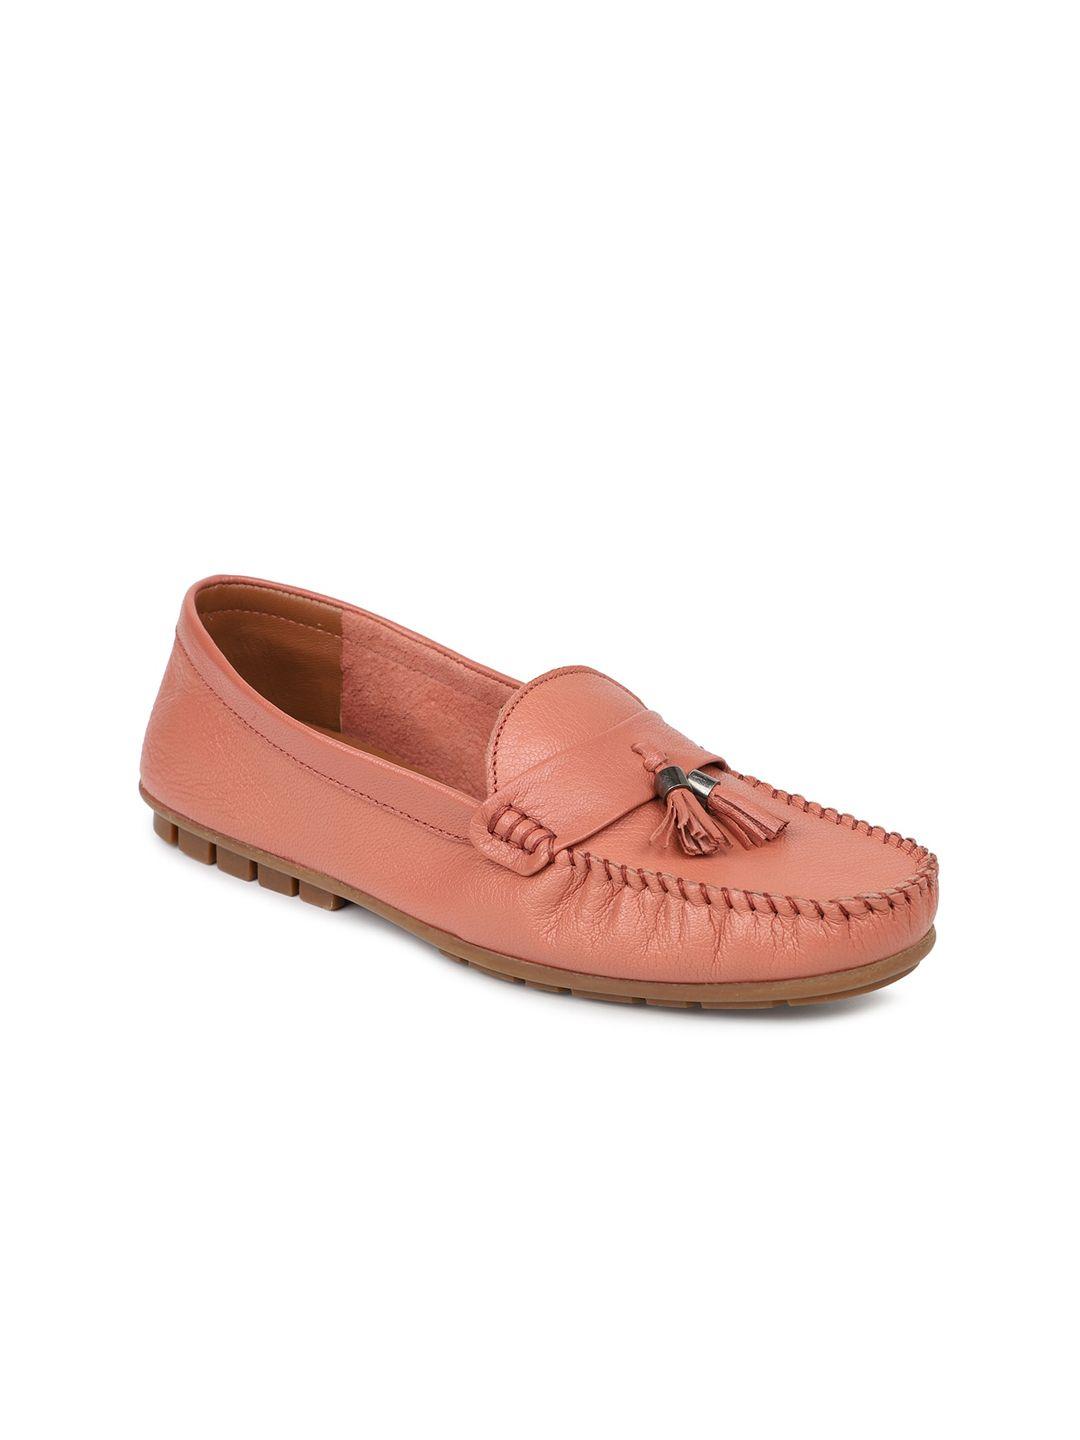 inc 5 women peach-coloured loafers